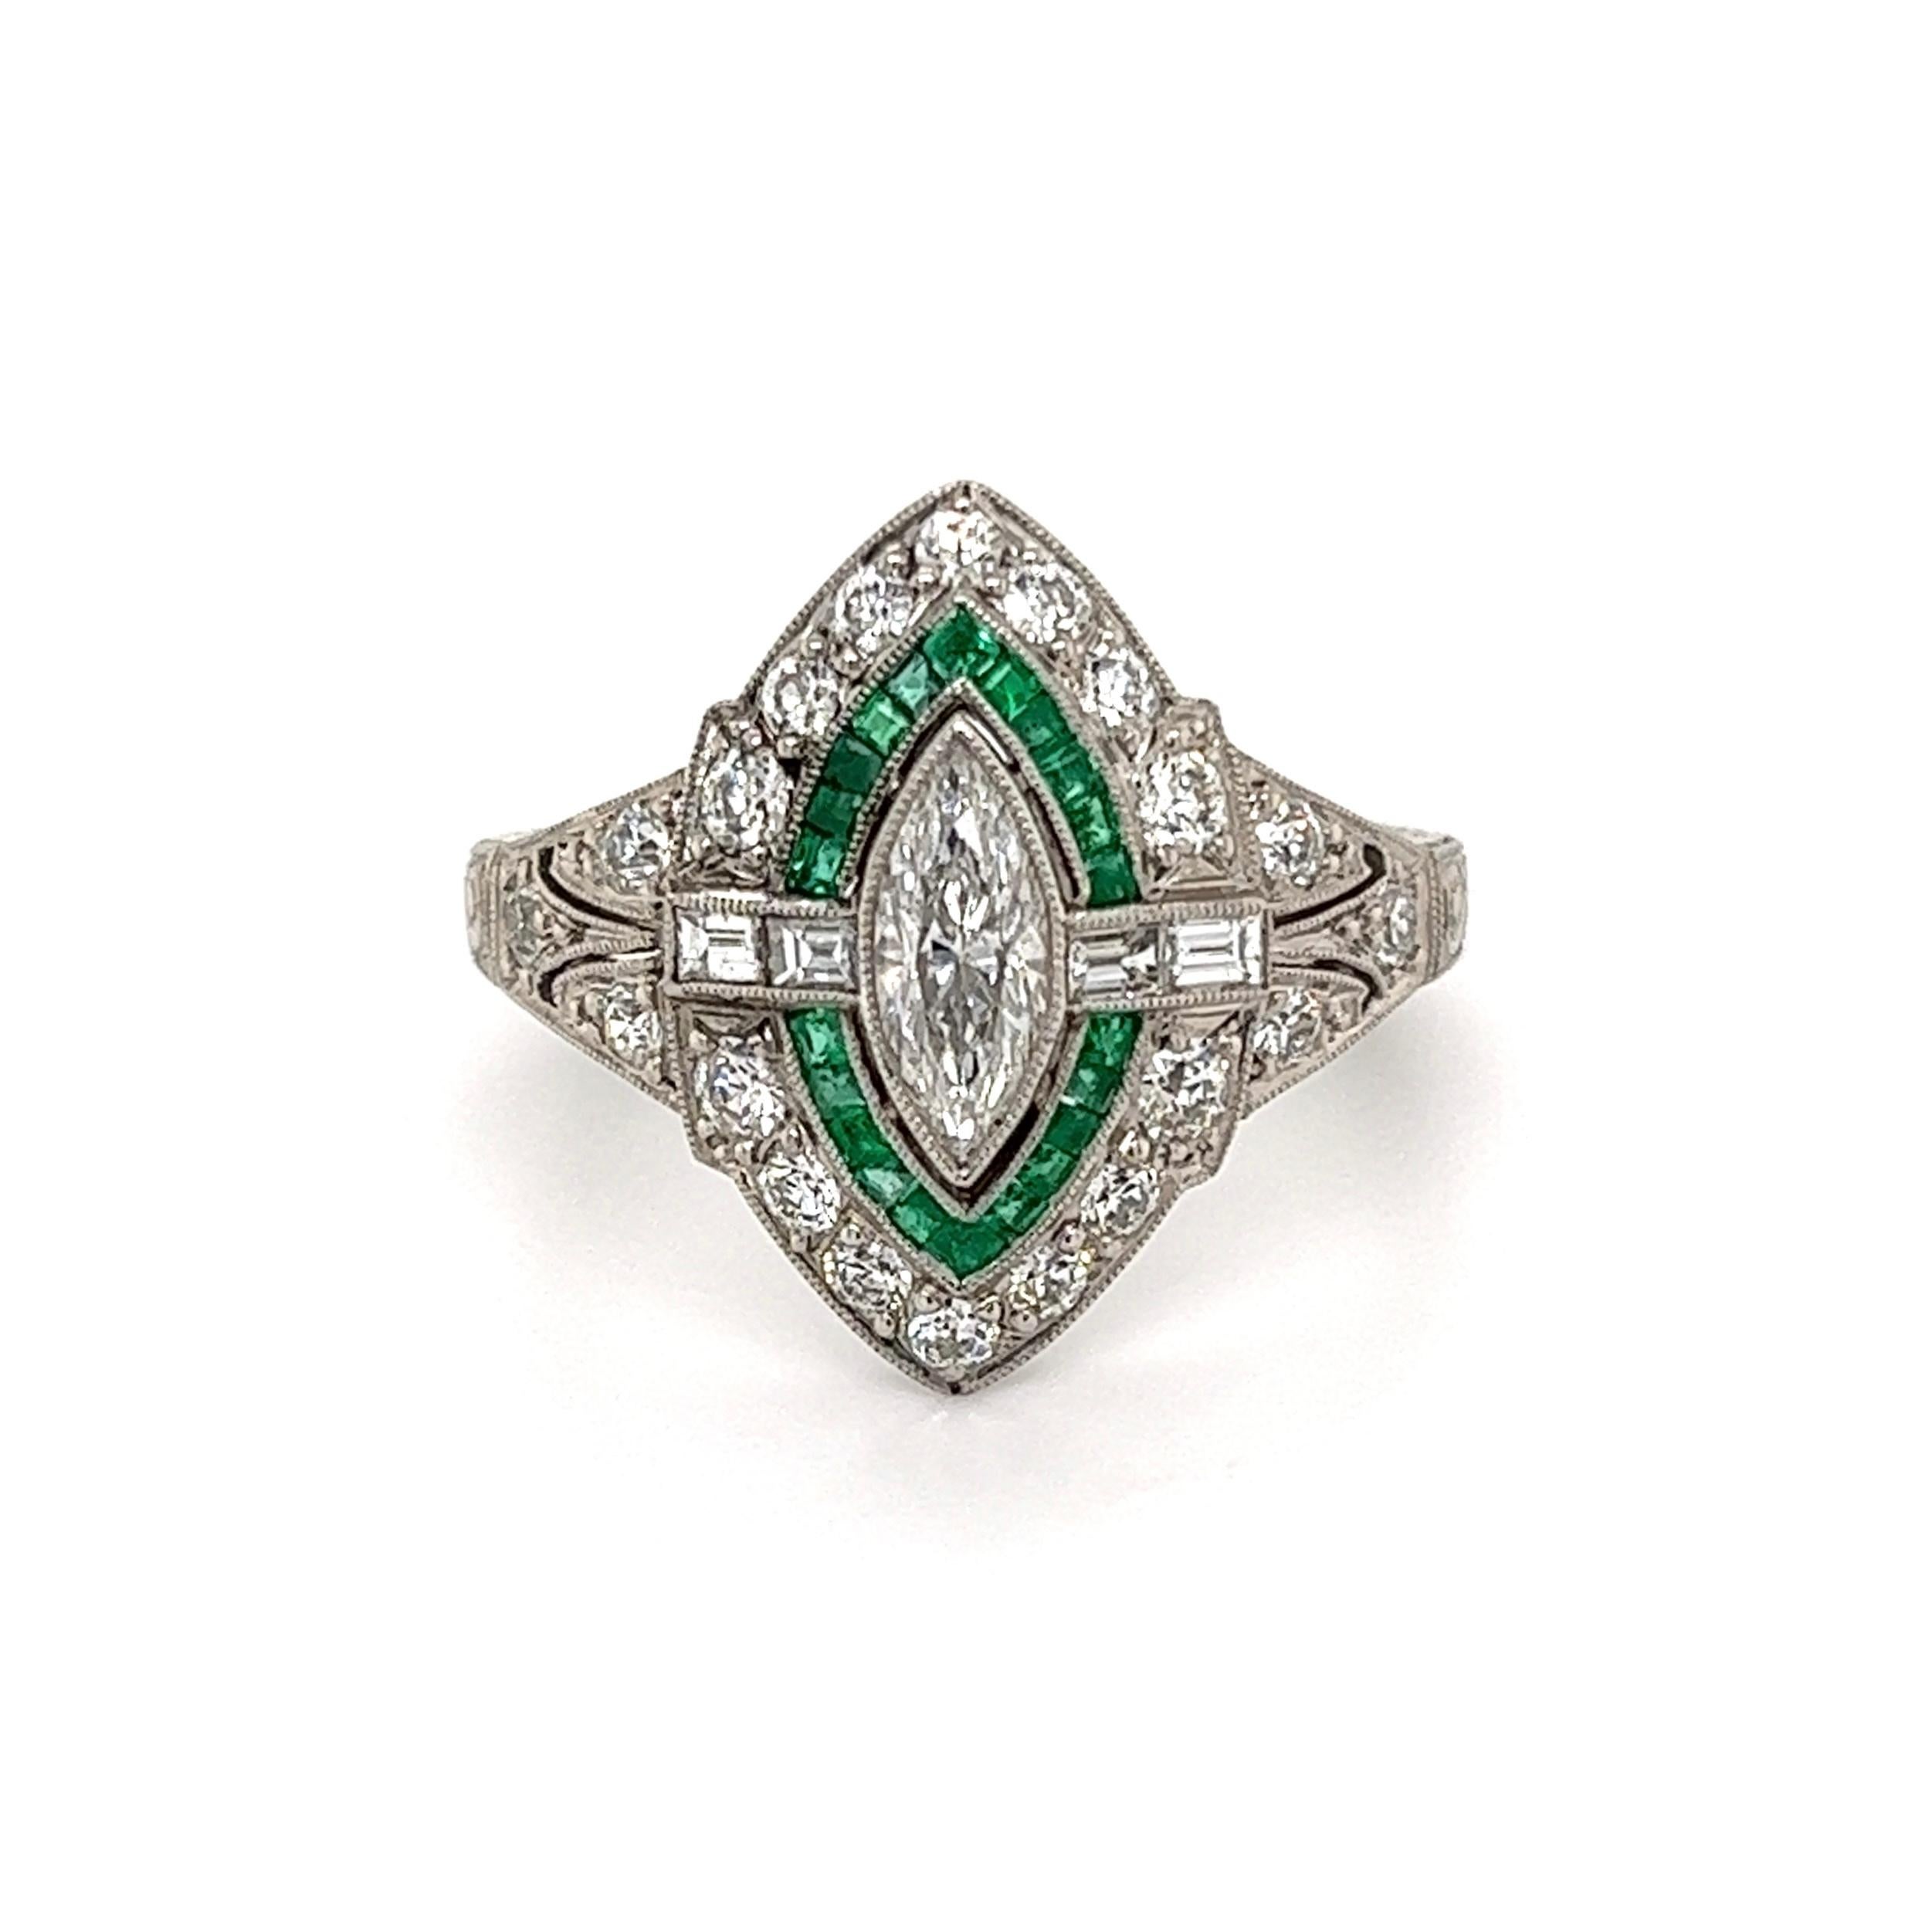 Simply Beautiful! Finely detailed Art Deco Revival Platinum Cocktail Ring, centering a securely nestled Marquis Diamond, approx. 0.48 Carat, accented by Diamonds, approx. 0.77tcw and Emeralds, 0.70tcw Enhancing the hand engraved shank are Diamonds.